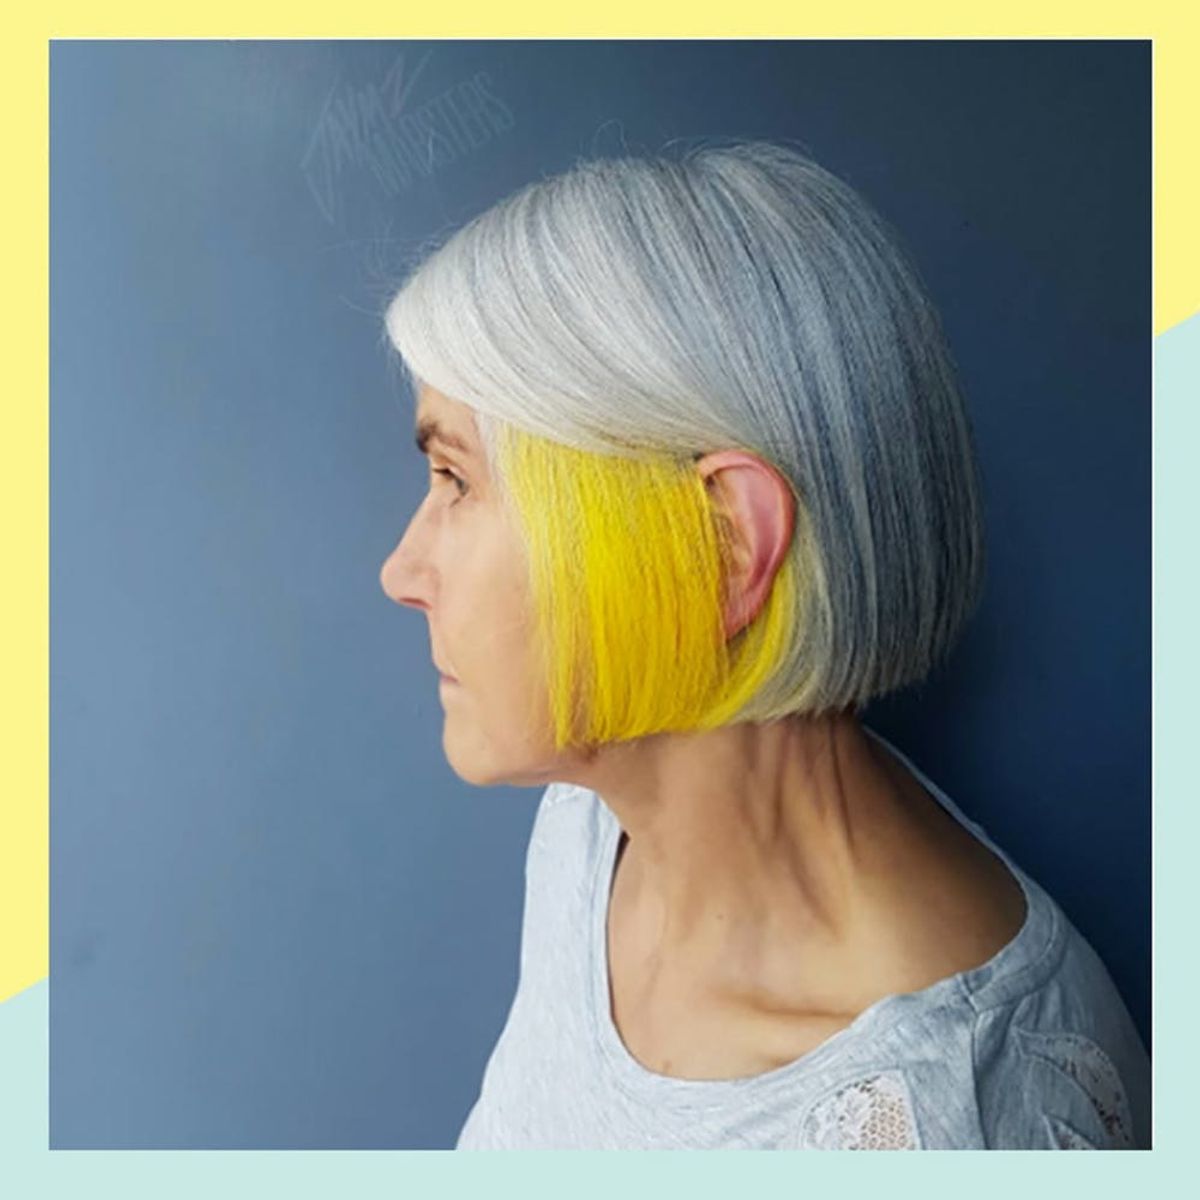 This Hairdresser Is Spicing Up Gray Hair With a Colorful Technique